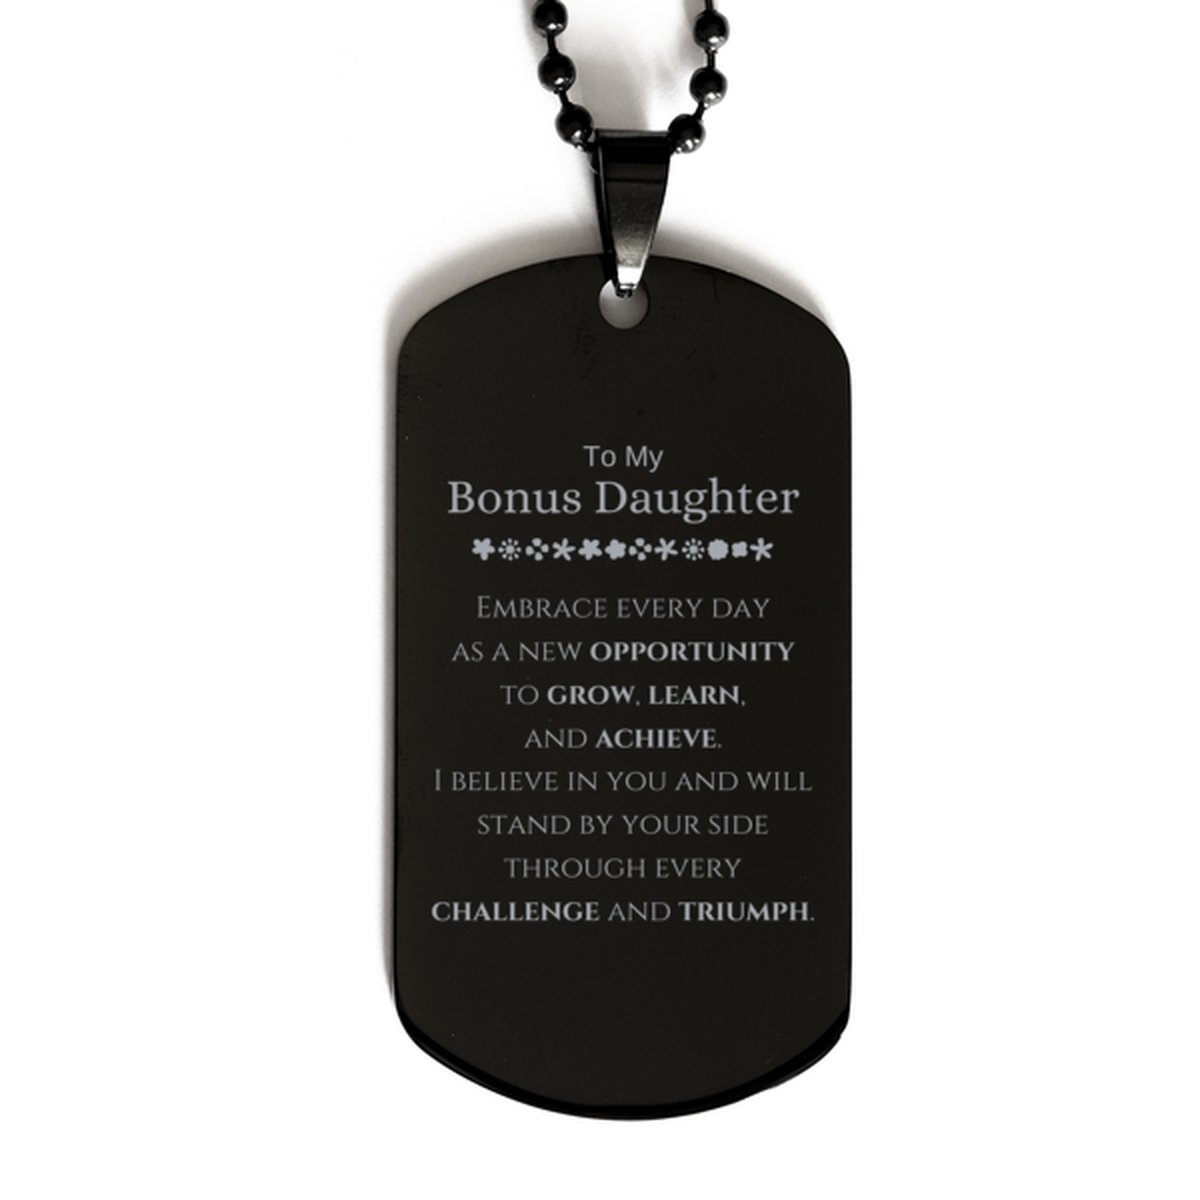 To My Bonus Daughter Gifts, I believe in you and will stand by your side, Inspirational Black Dog Tag For Bonus Daughter, Birthday Christmas Motivational Bonus Daughter Gifts